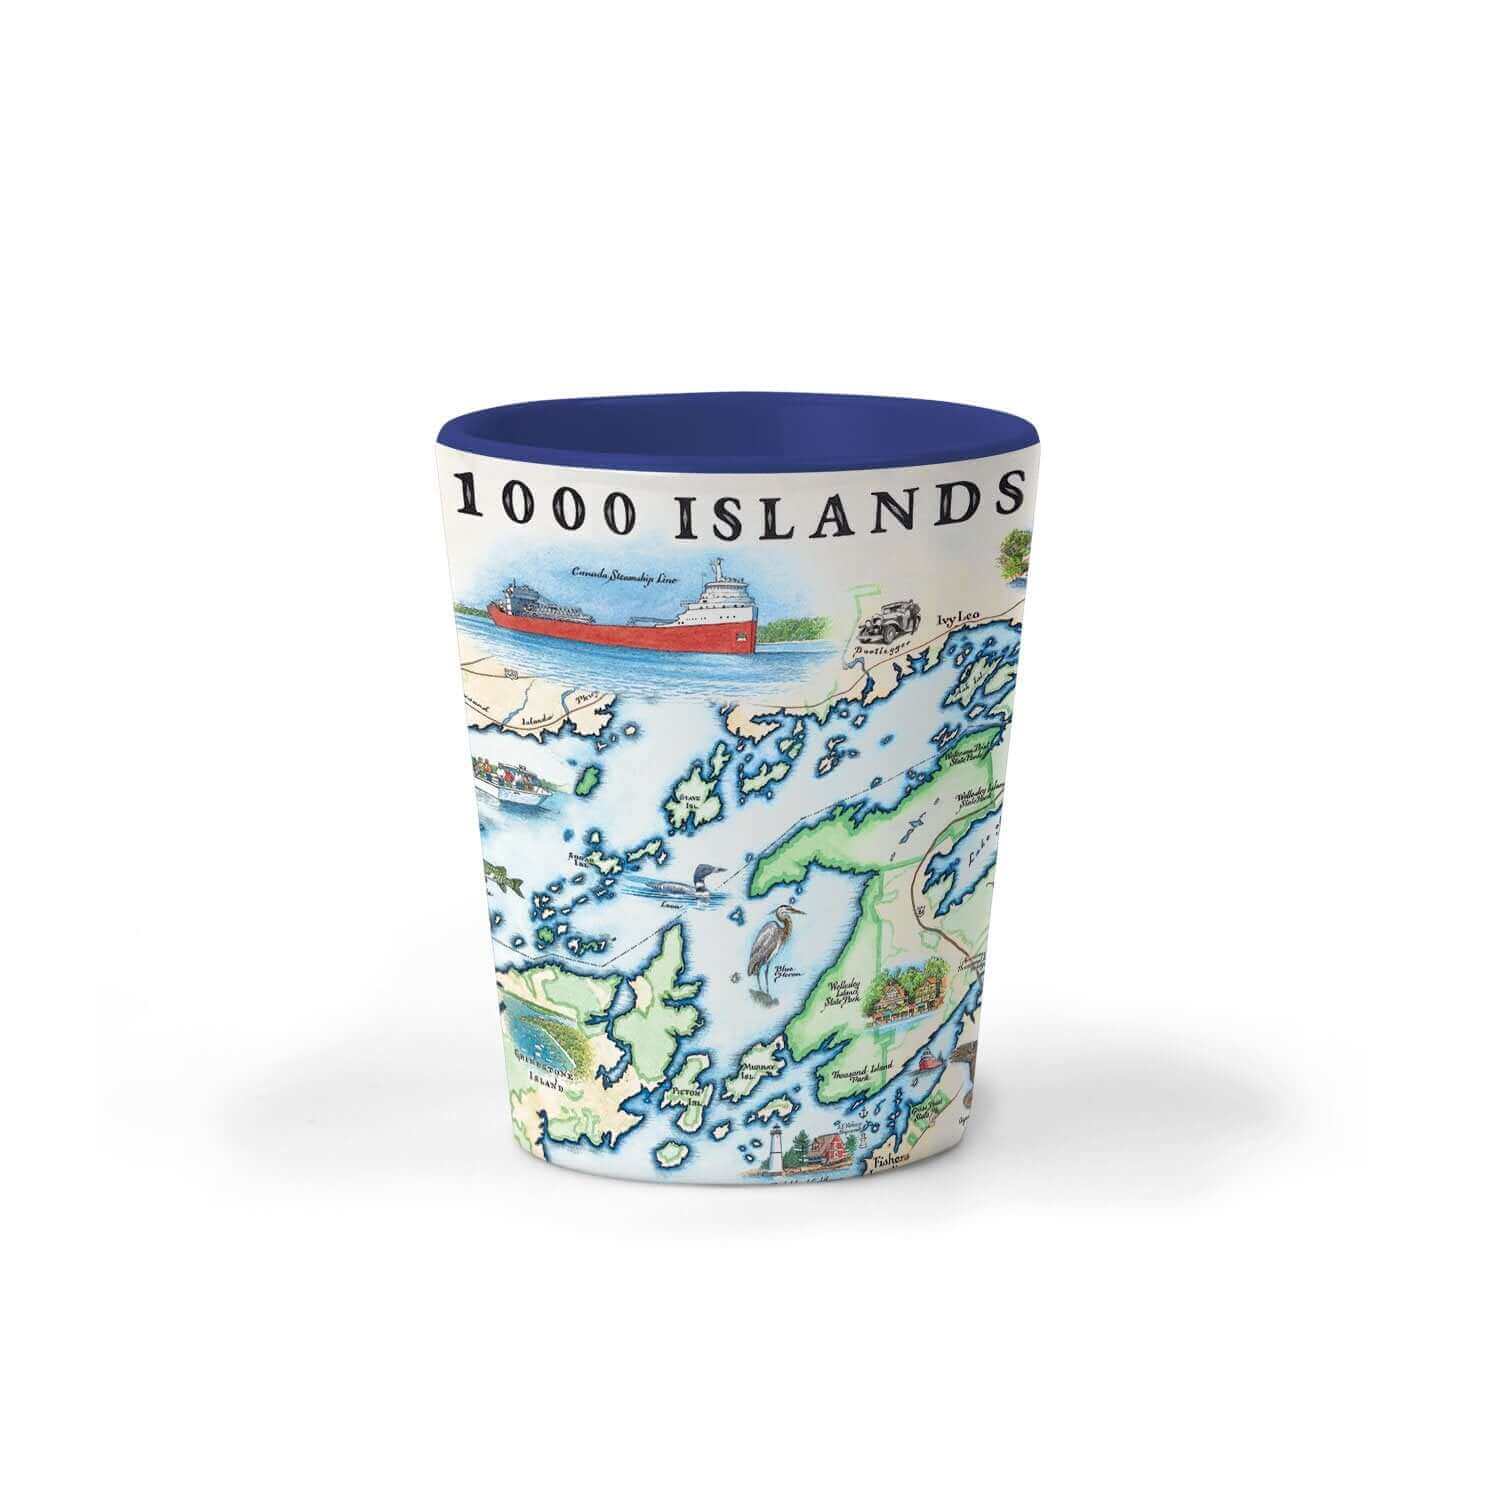 1000 Islands Map Ceramic Shot Glass in natural blues, green and beige colors. Map features Bolt Castle and Singer Castle as well as flora a fauna such as blue herons, whitetail deer, and mink.